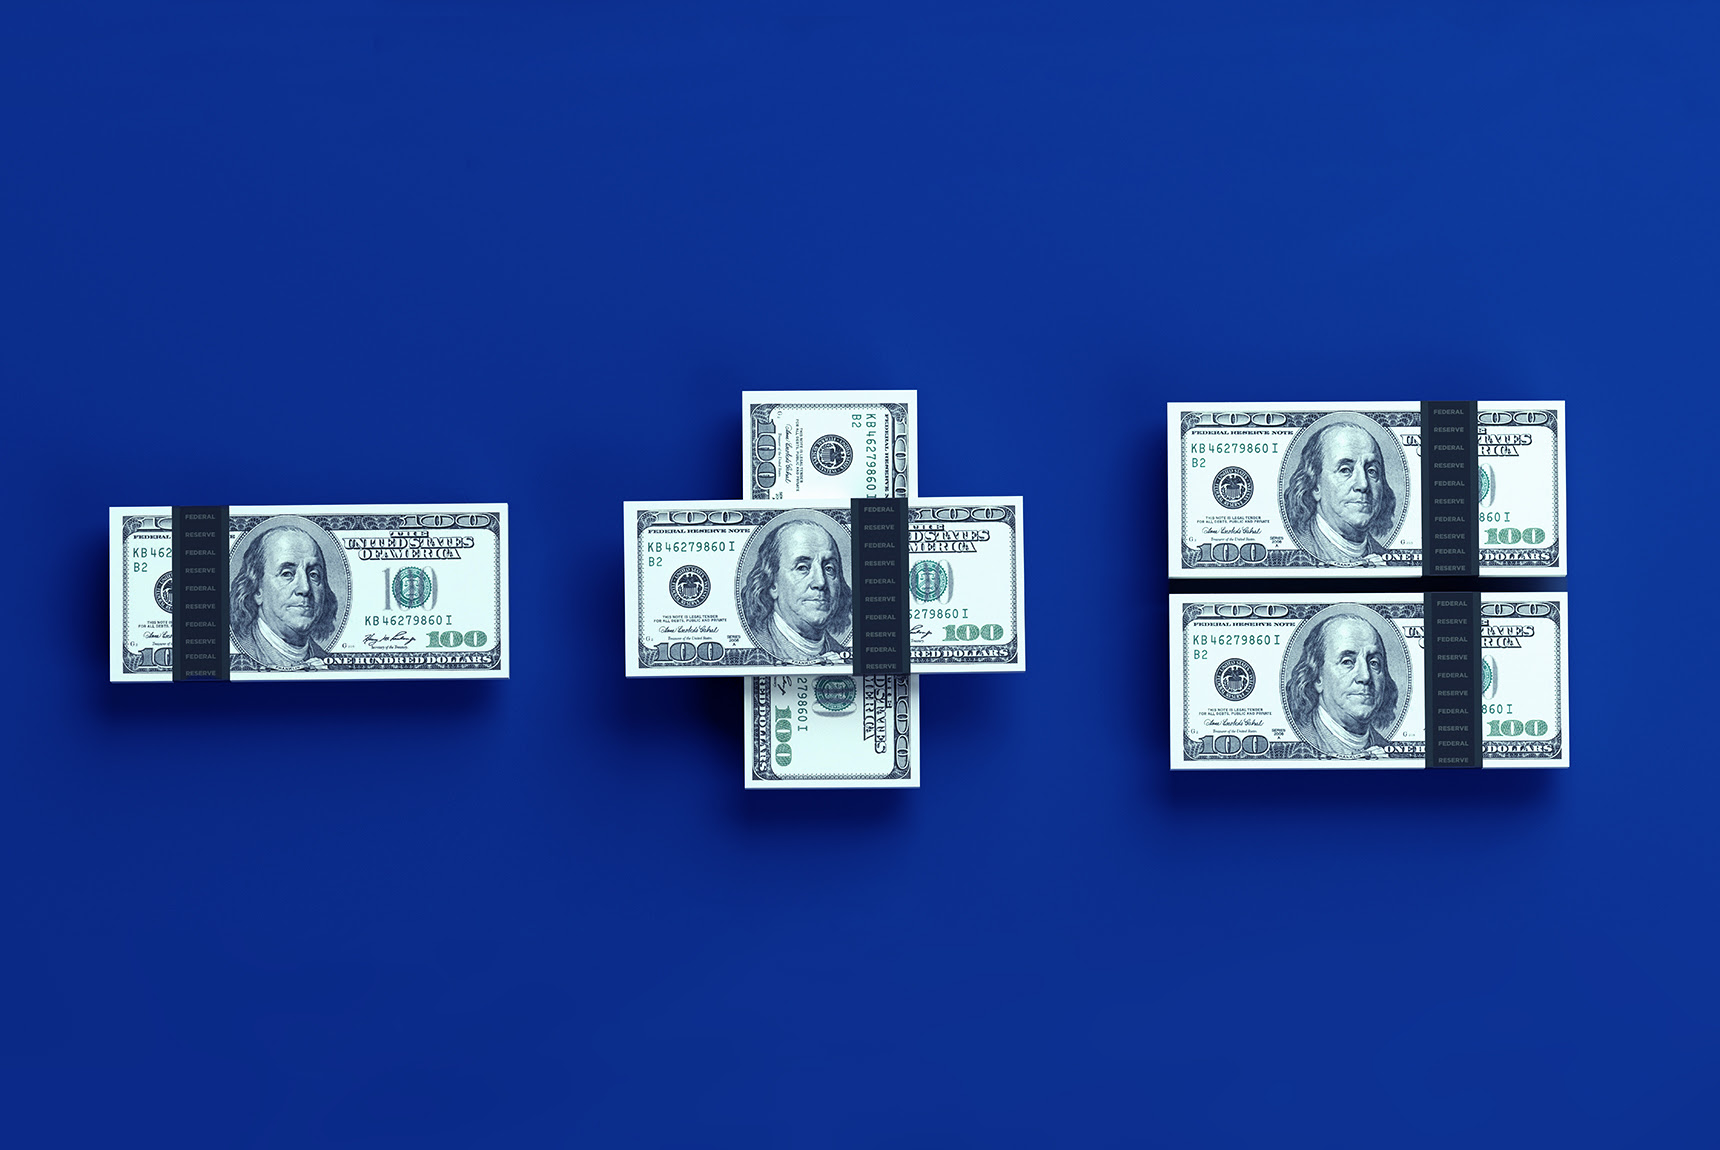 3 stacks of American dollars. Image credit iStock/Getty Images Plus. Clicking begins engagement with content.